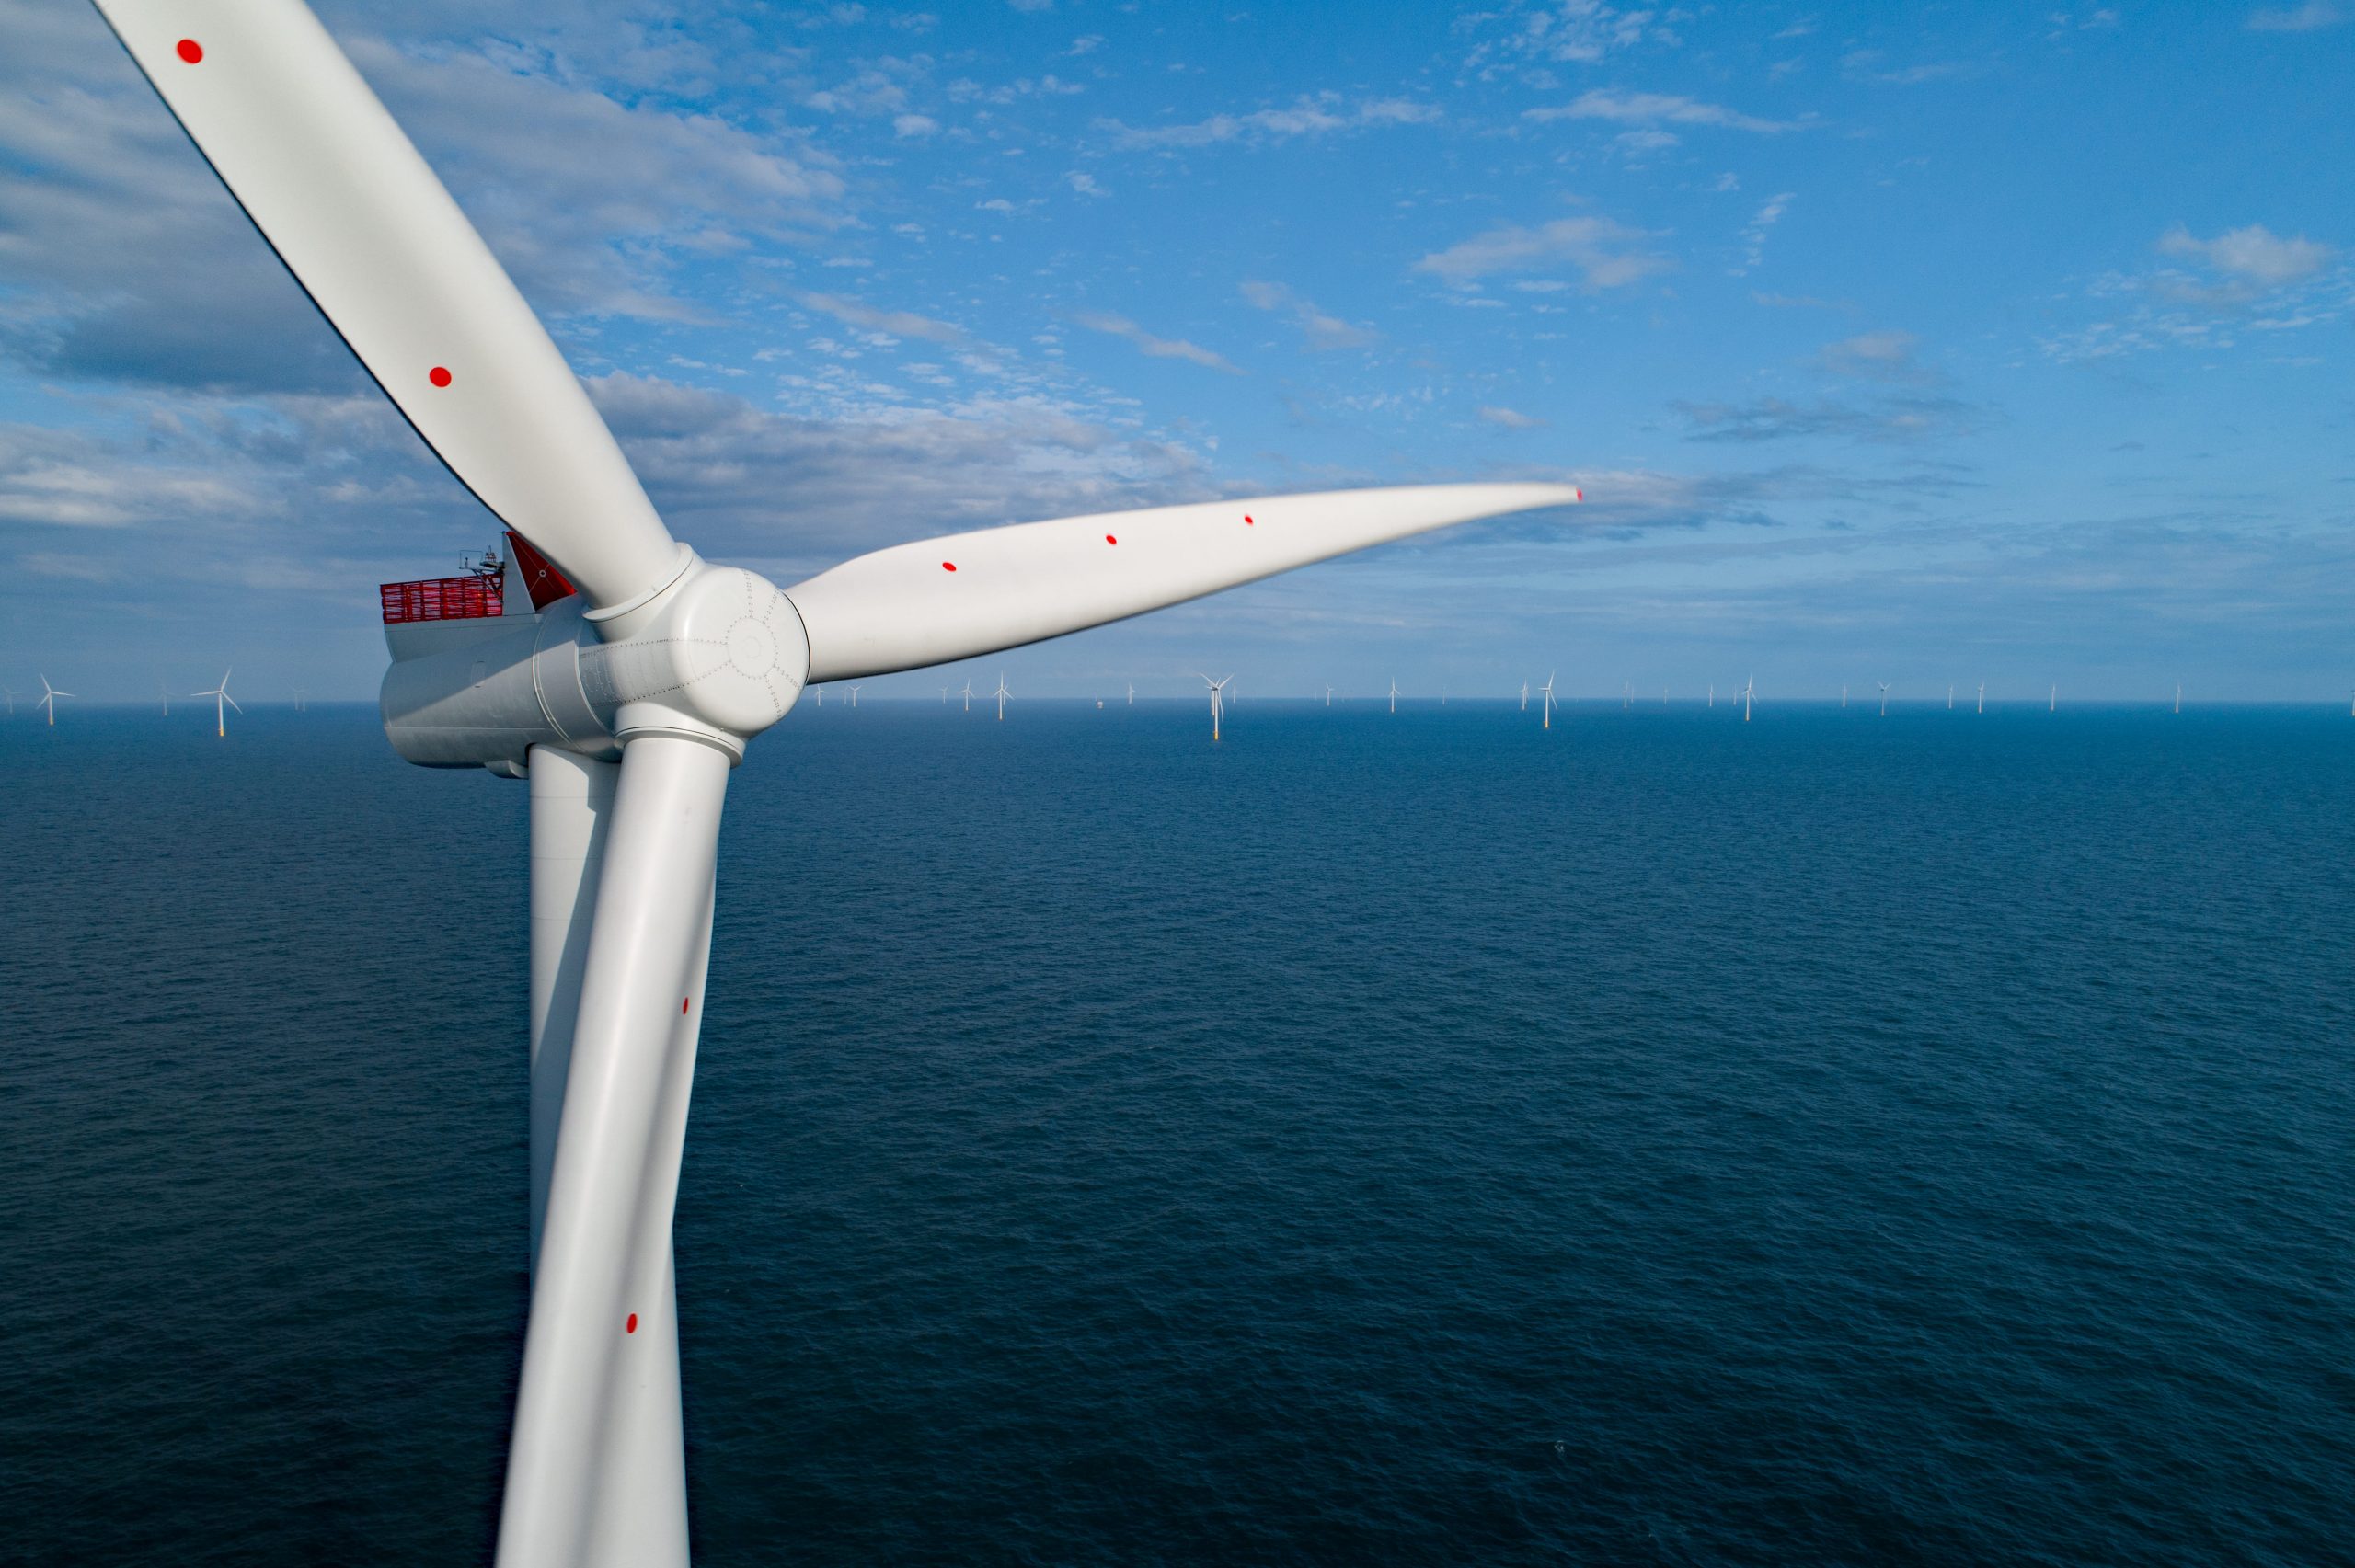 The UK broke previous wind-power records in 2020. Source: Orsted